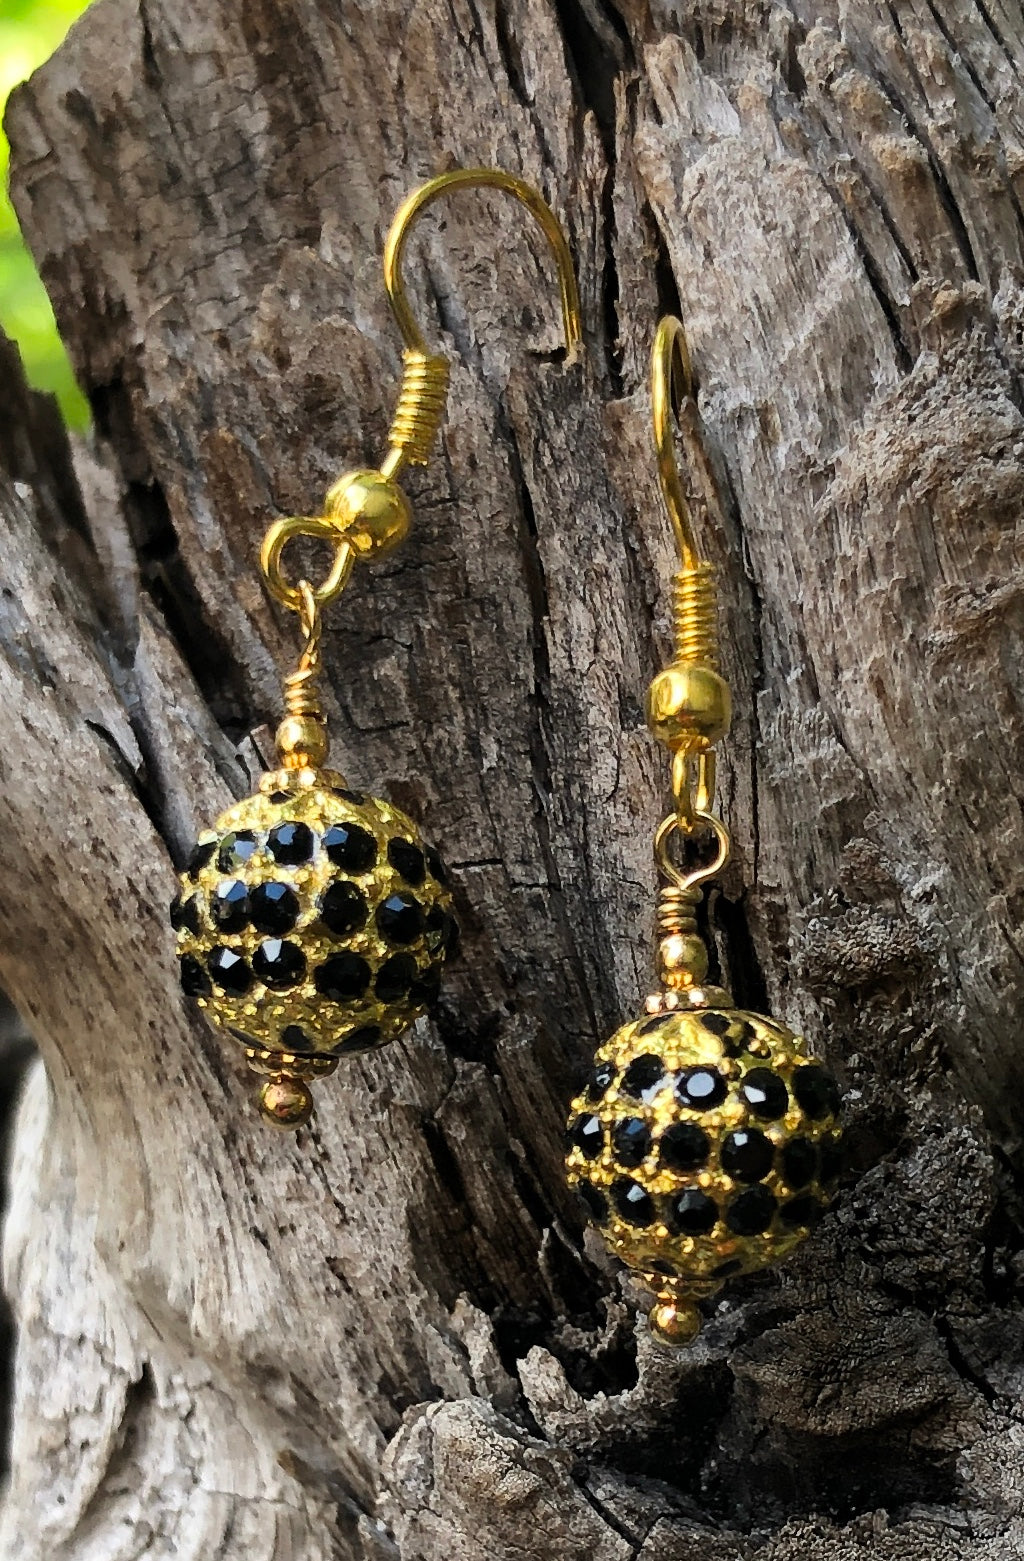 Gold and Black Crystal Earrings